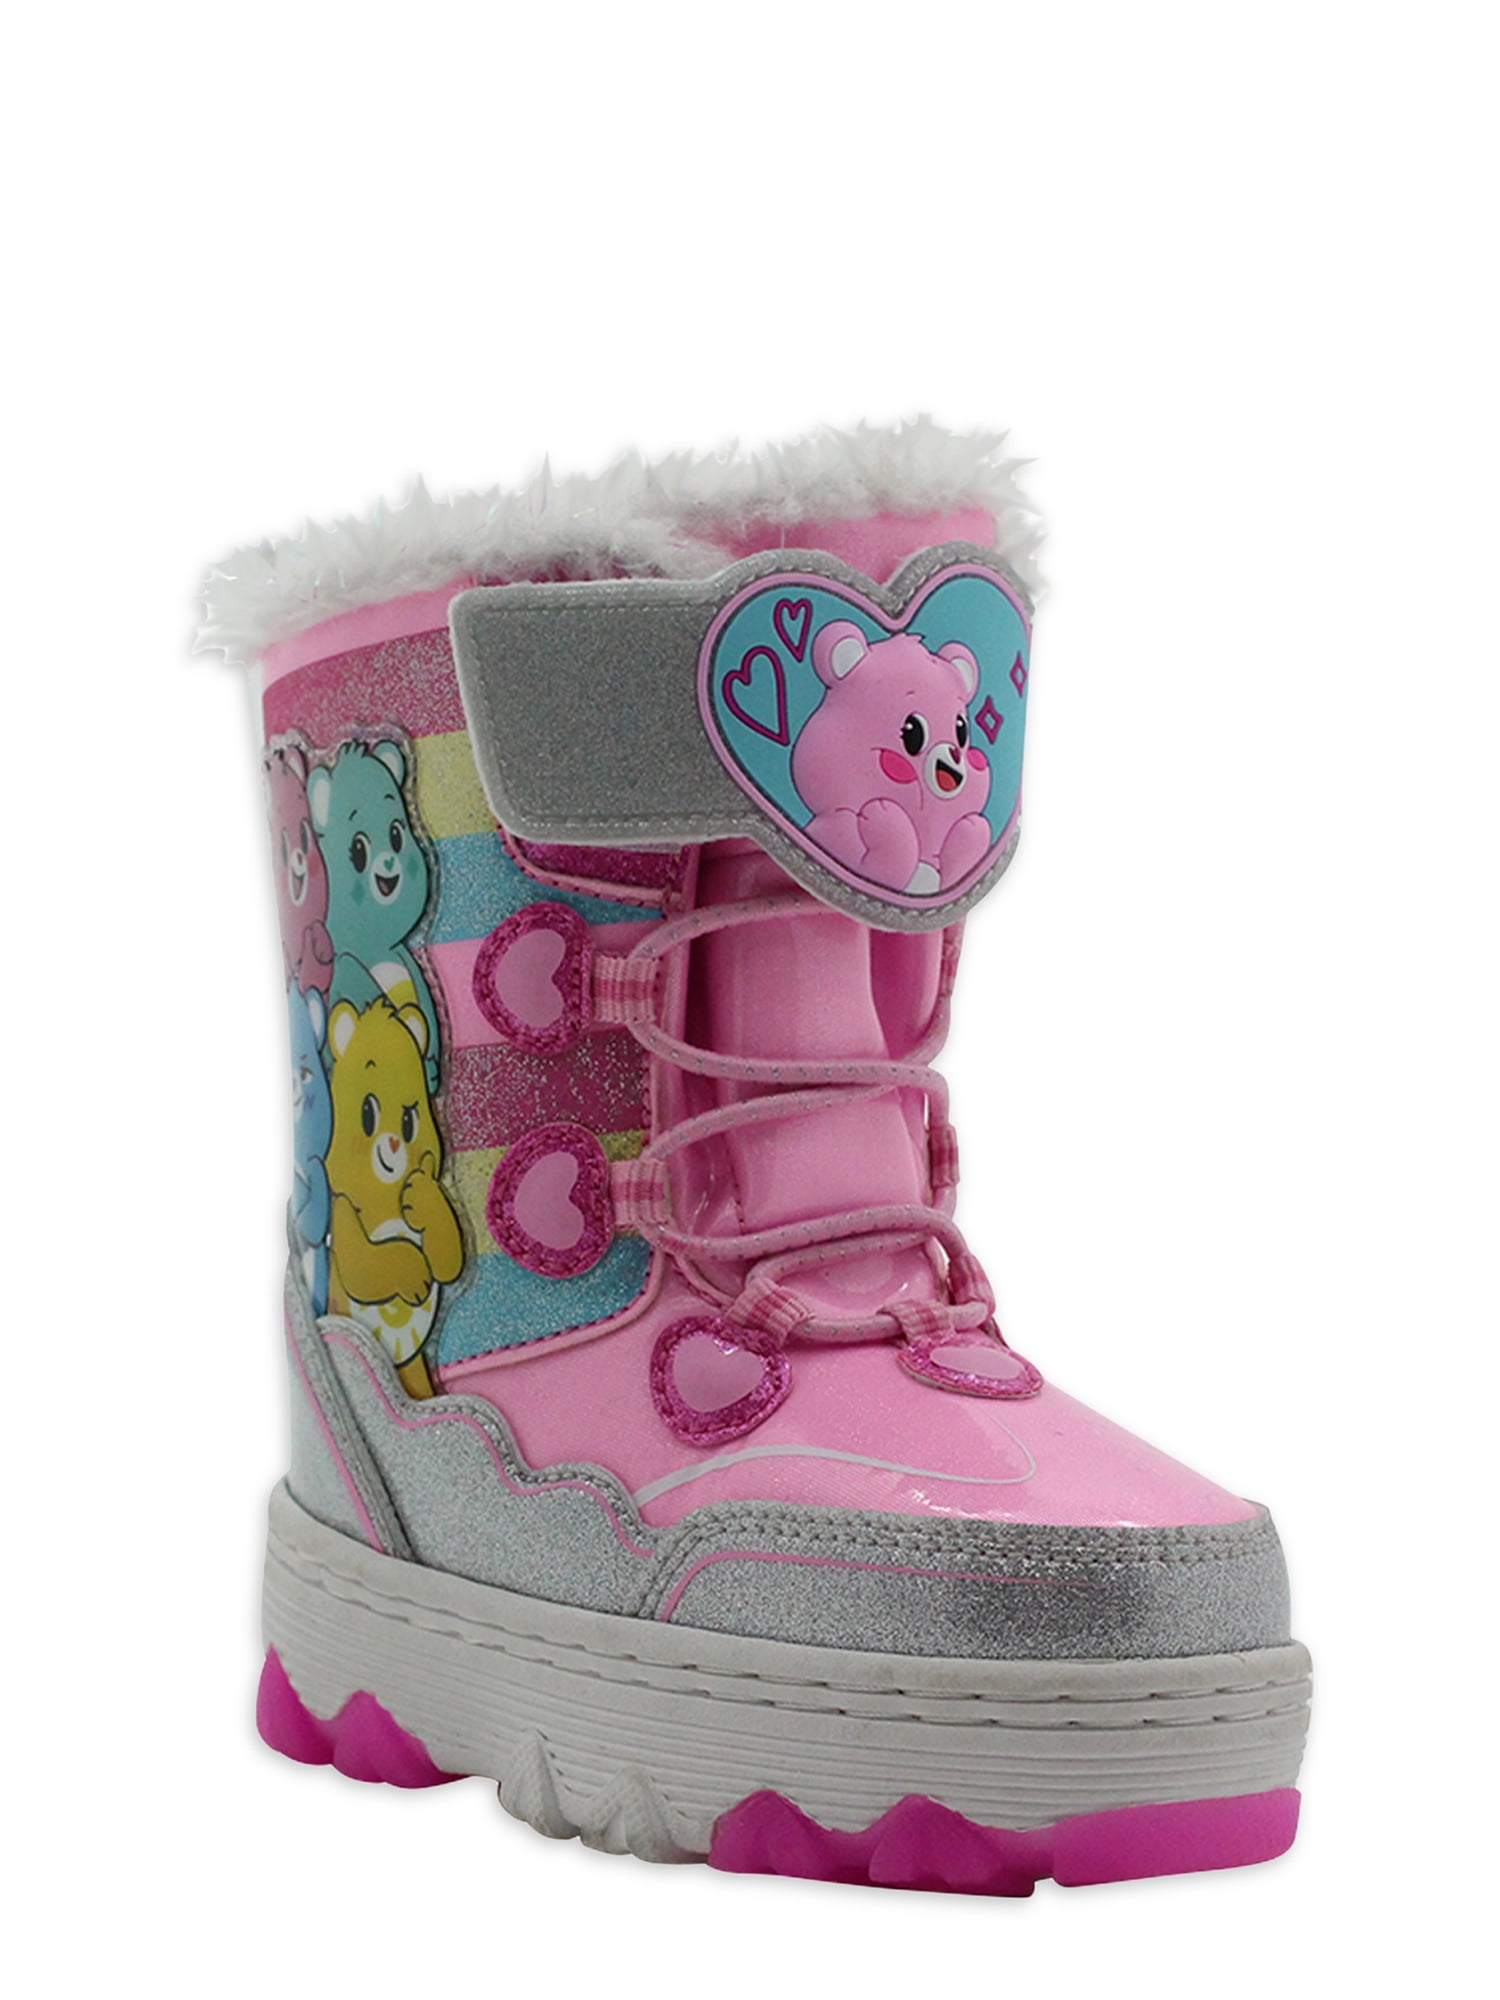 BOOTS RAINBOW PASTEL Rainbow Star's WomenS Boots Care Bear Rainbow Boots Unicorn Boots Ankle Boots Custom Made Boots